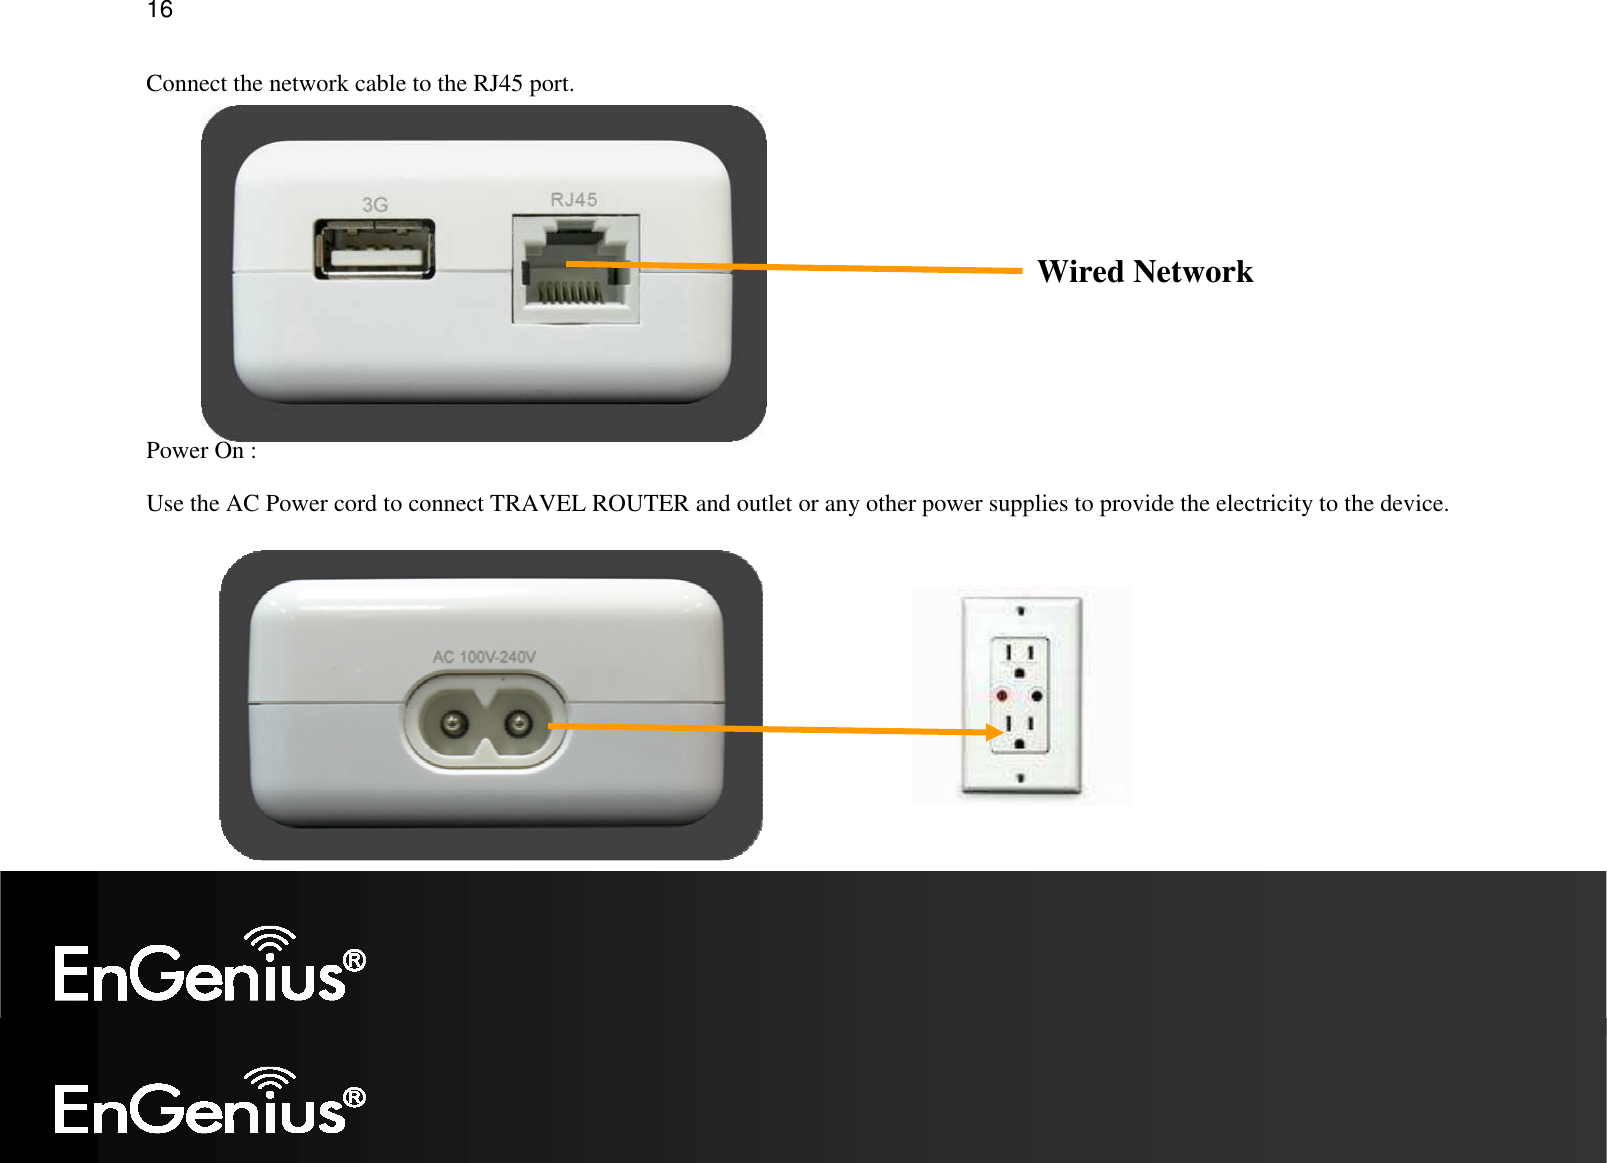   16 Connect the network cable to the RJ45 port.       Power On :  Use the AC Power cord to connect TRAVEL ROUTER and outlet or any other power supplies to provide the electricity to the device.  Wired Network 